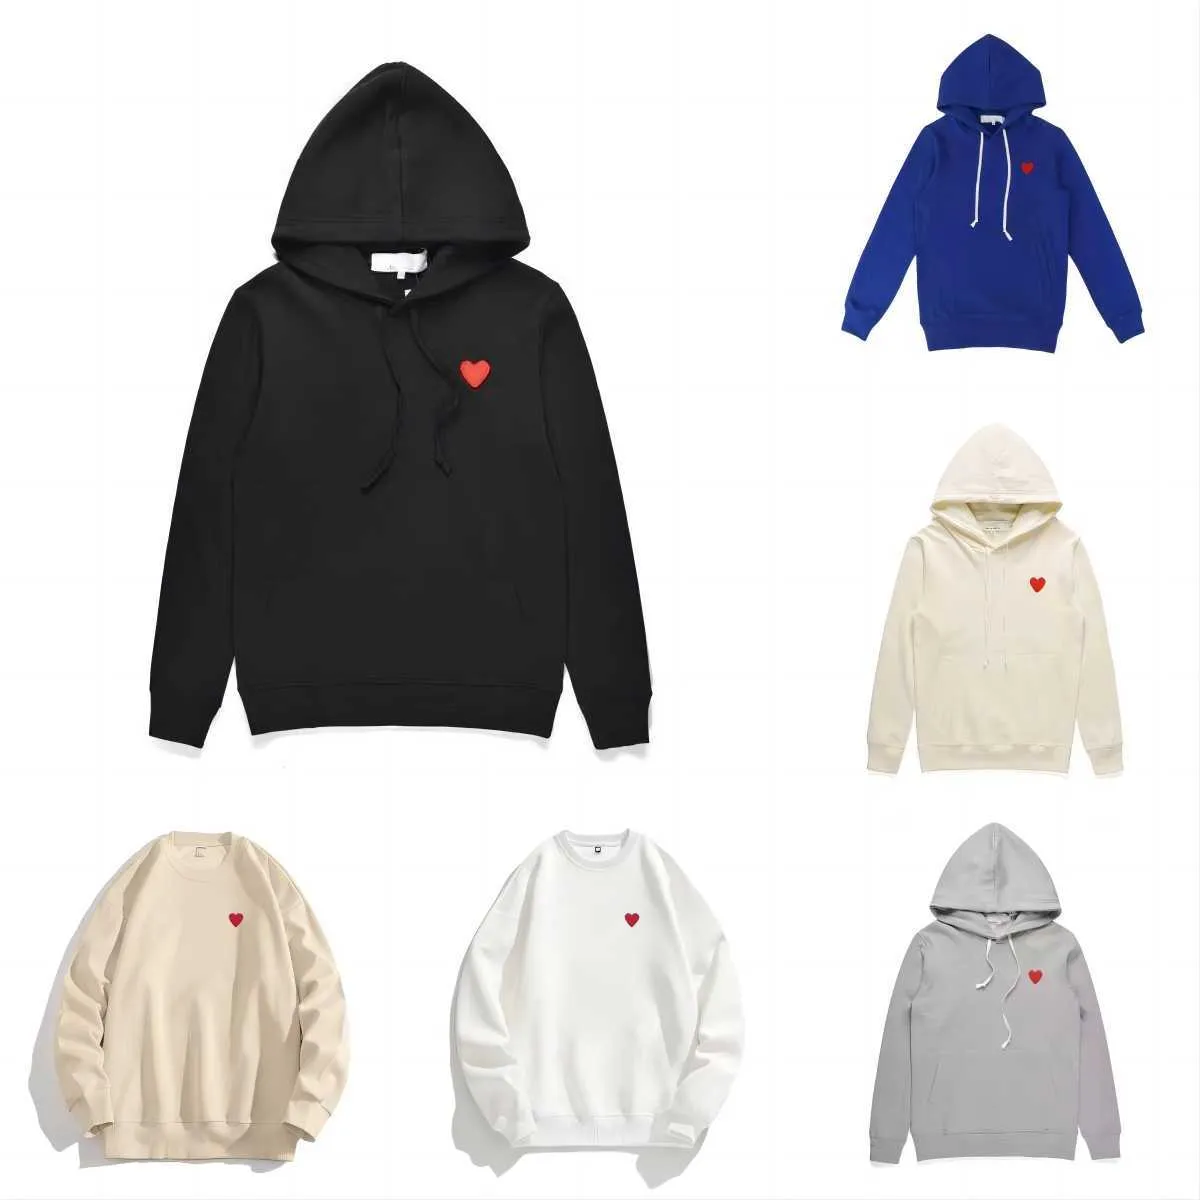 Hoodies Hoodies Sweatshirts 23s Designer Play Comme des cavaliers des garcons broderie à manches longues Pullover Femmes Red Heart Loose Pull Vêtements High